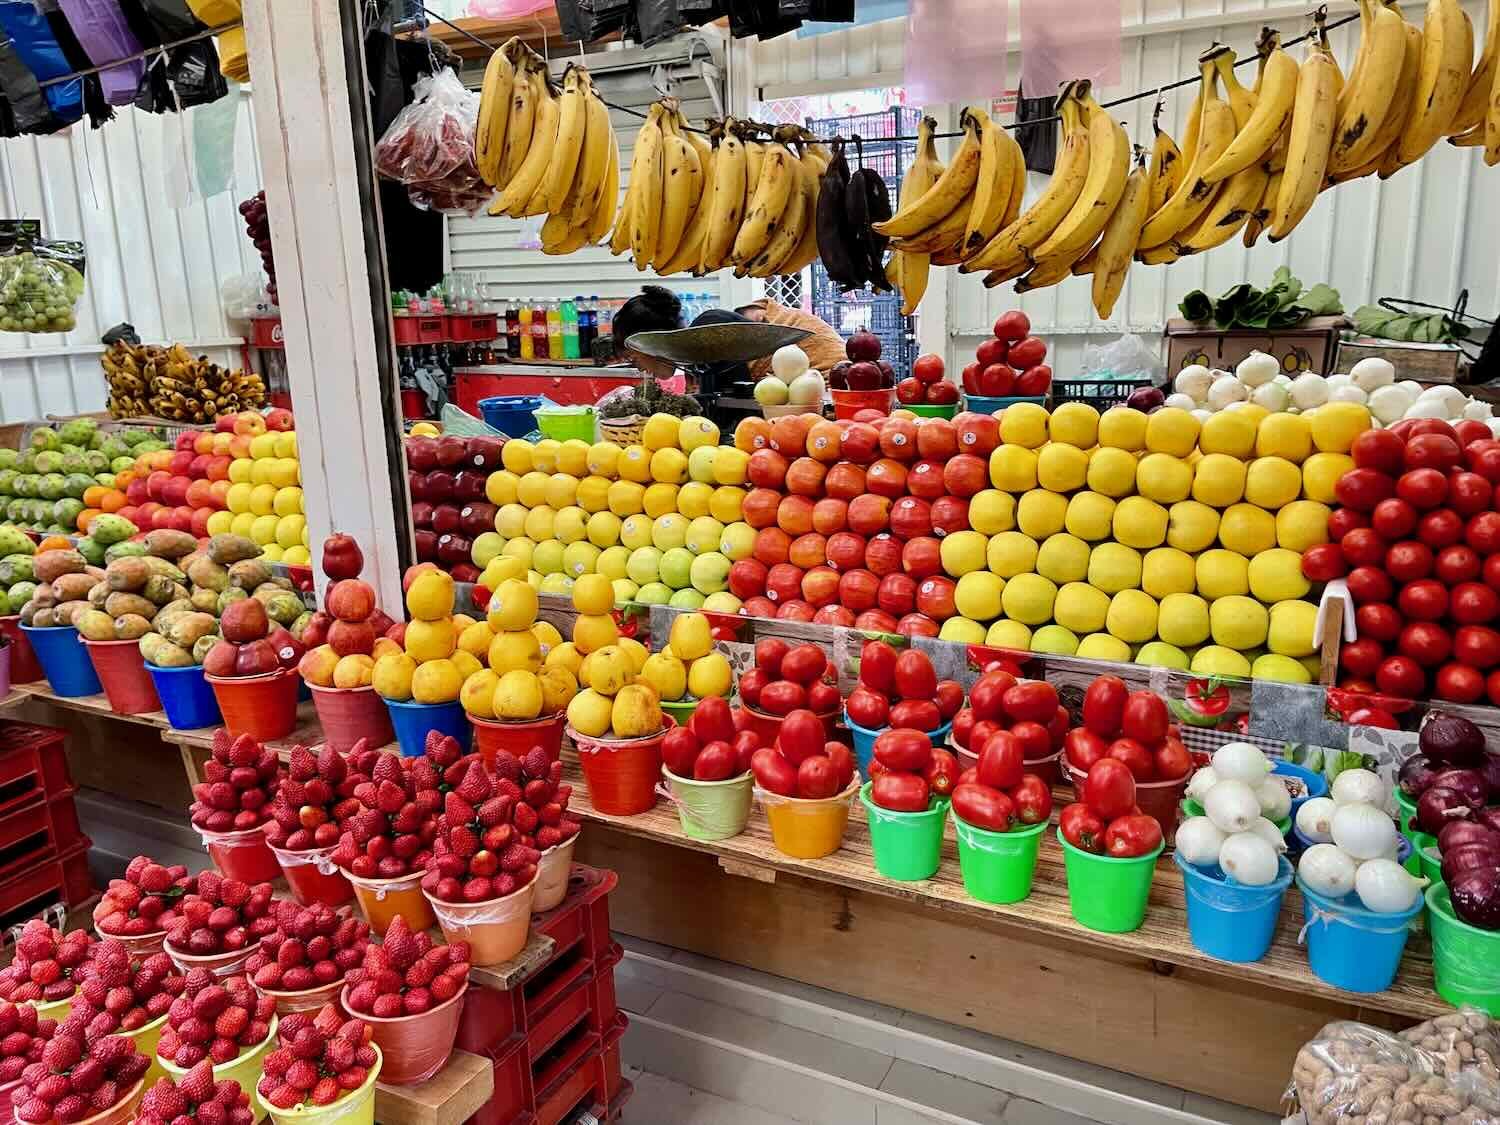 The vendors in San Cristóbal had a real flair for attractive produce displays